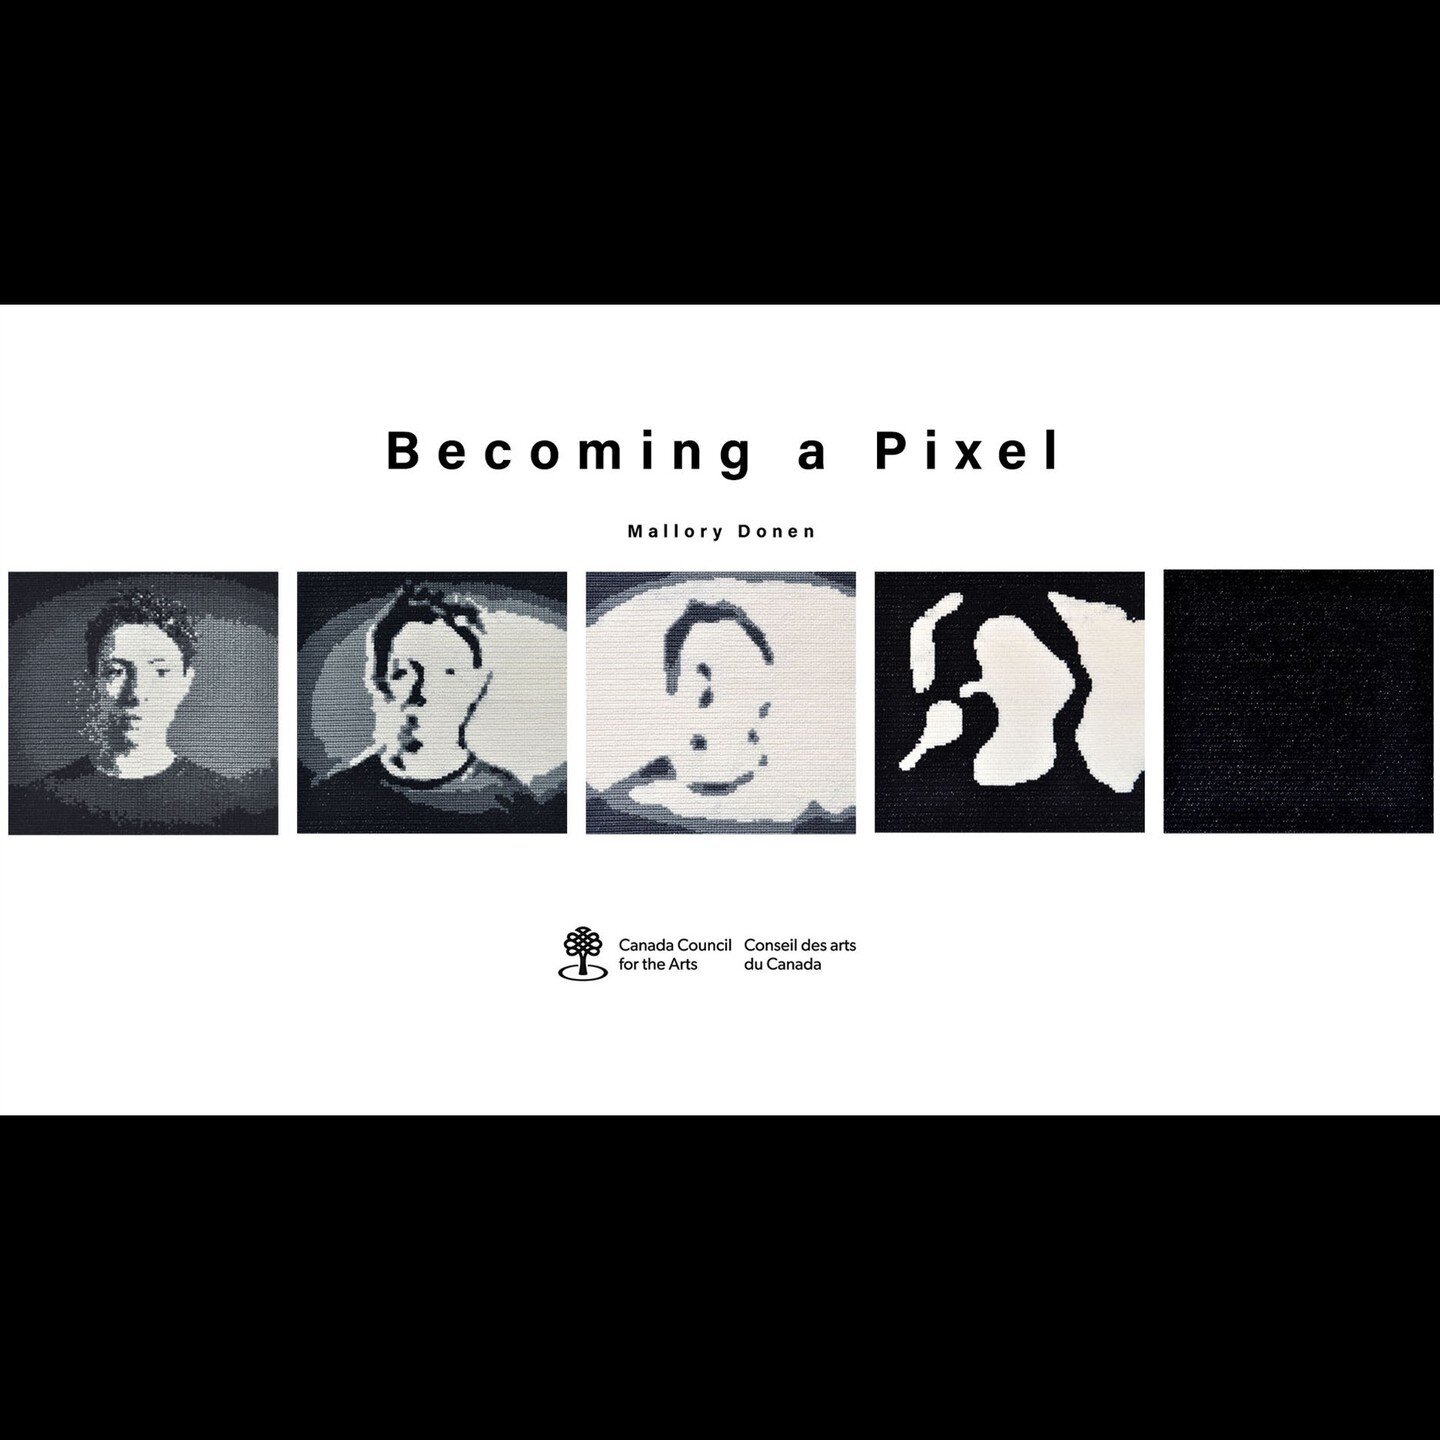 That&rsquo;s a wrap on the Becoming a Pixel series! A huge shout out to @canadacouncil I can&rsquo;t thank them enough for their support with this project and for #bringingtheartstolife #becomingapixel ⁠
⁠
I&rsquo;m hoping to have the series framed s